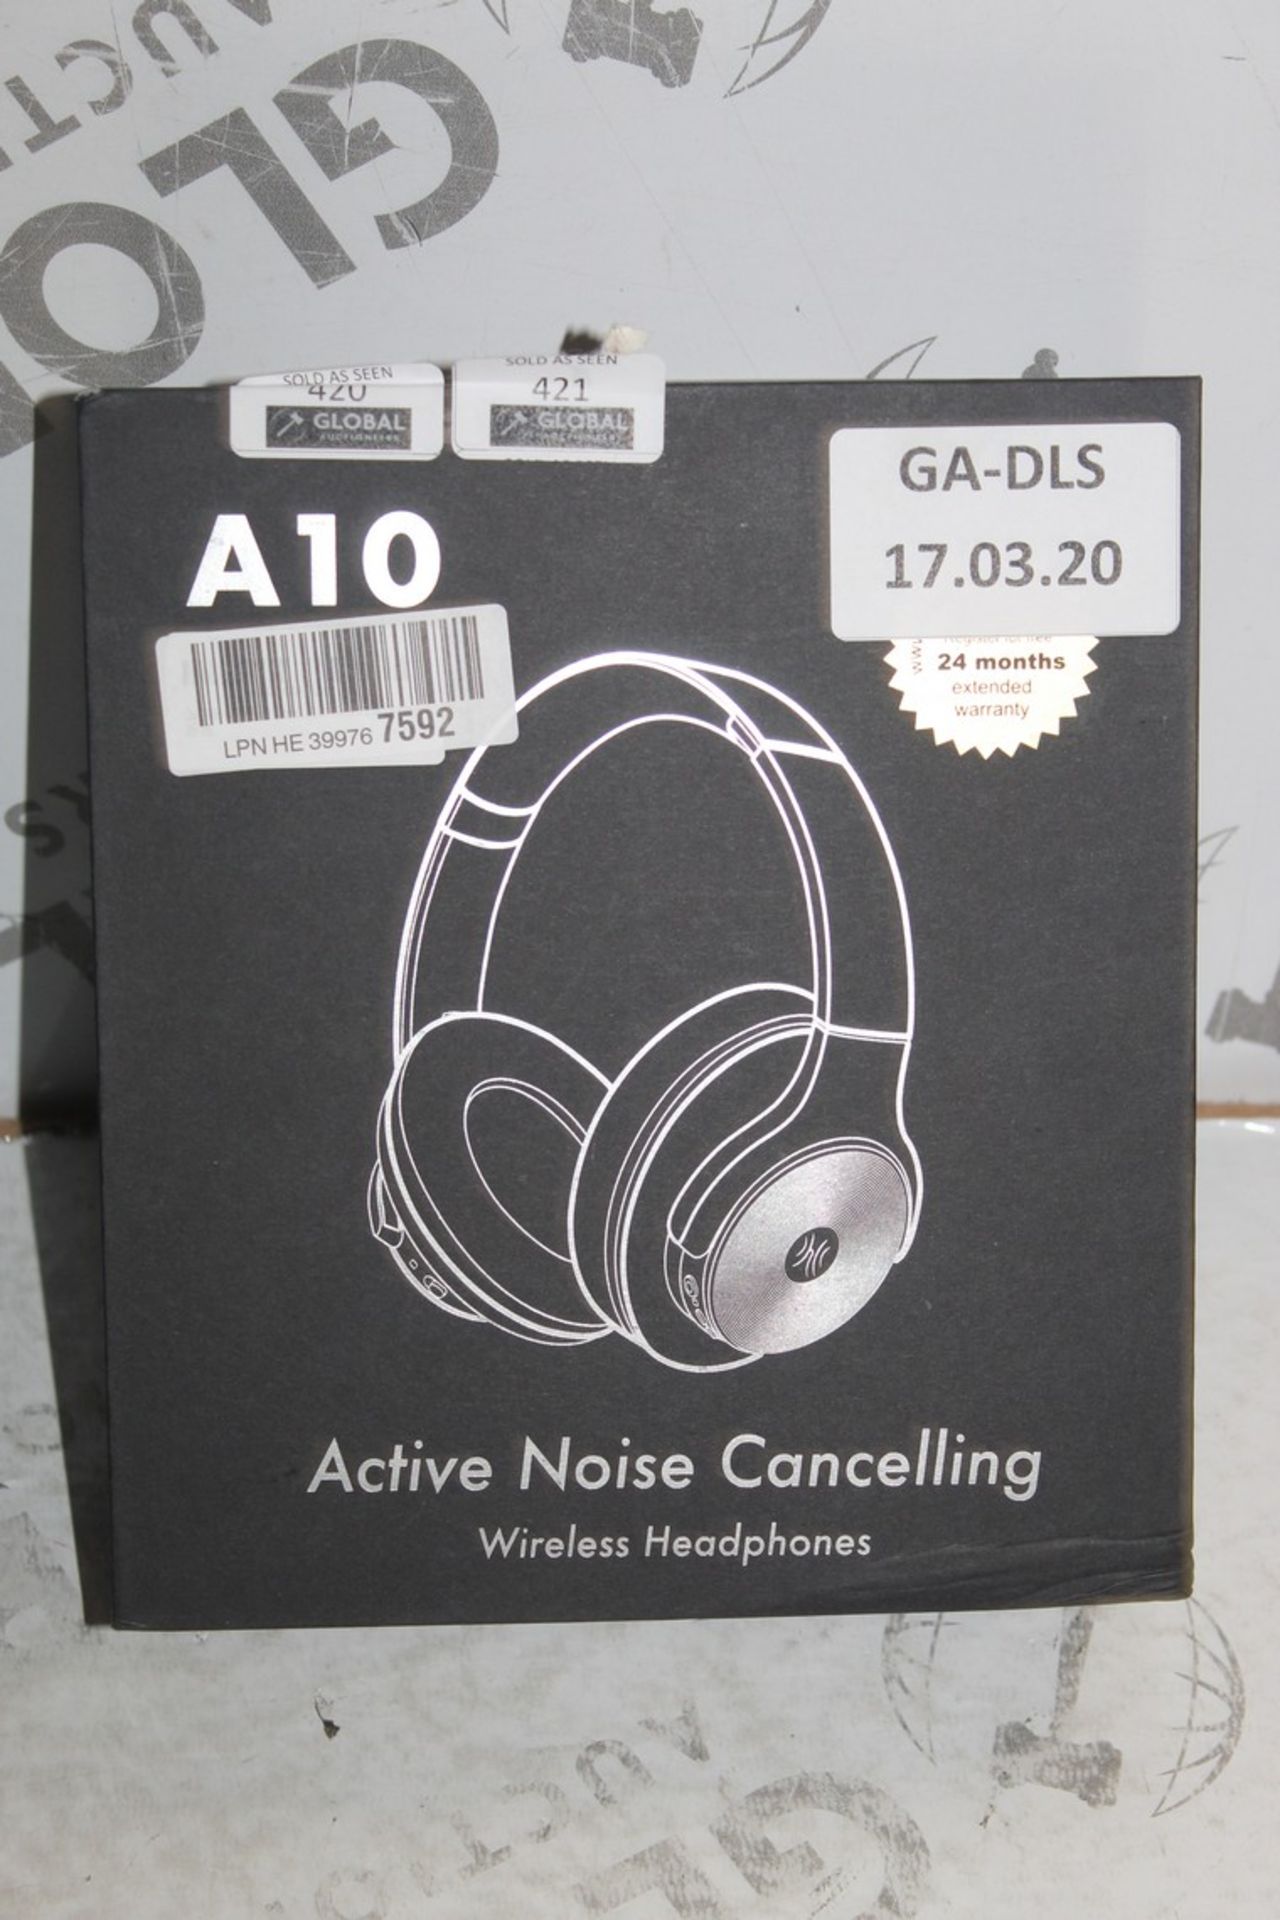 Boxed Brand New Pair Of One Odio A10 Wireless Noise Cancelling Headphones RRP £60 (Appraisals